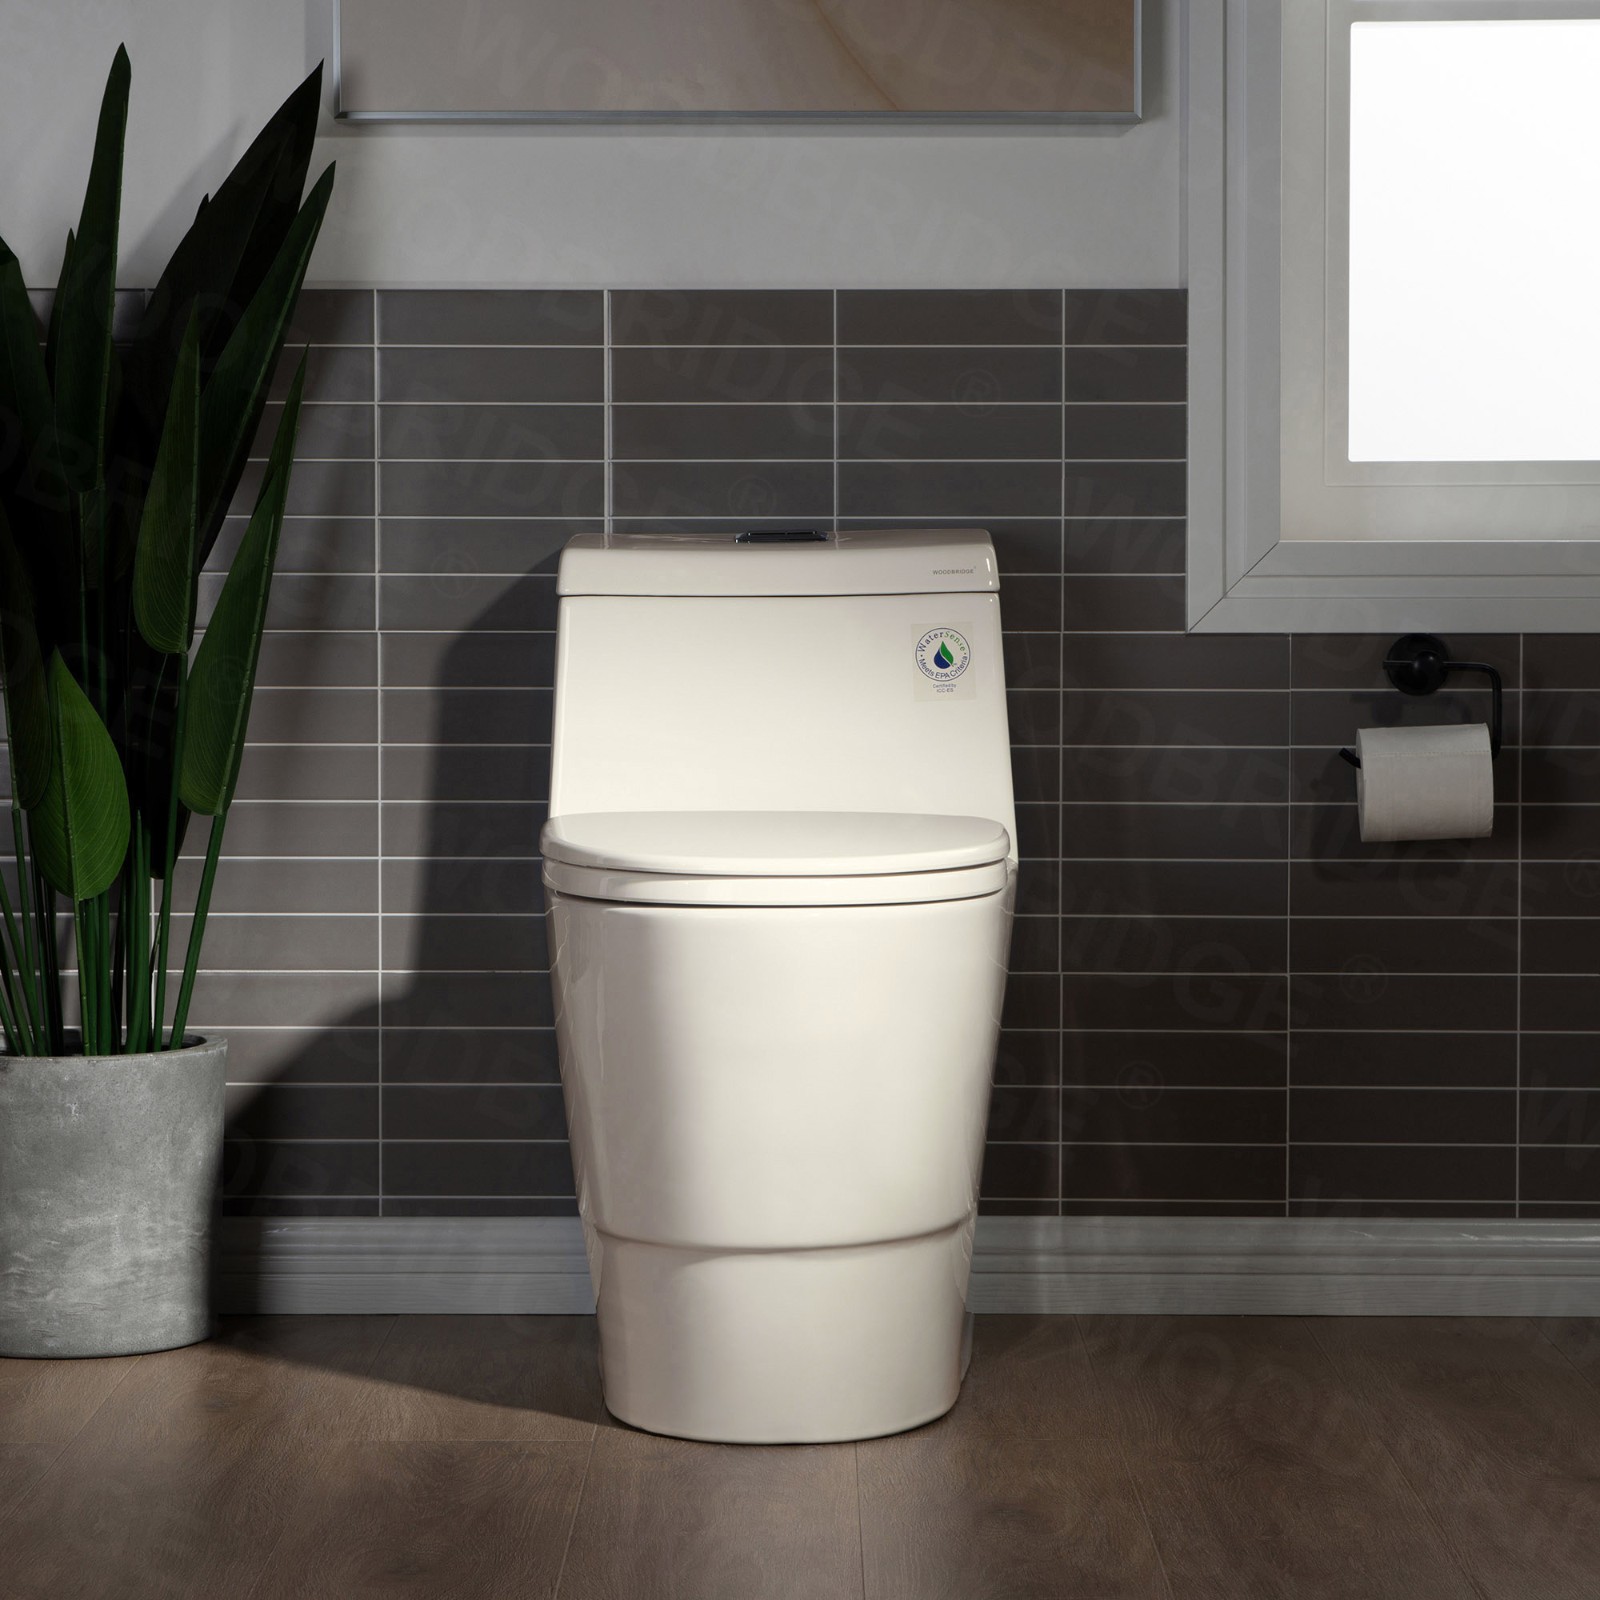  WOODBRIDGEE One Piece Toilet with Soft Closing Seat, Chair Height, 1.28 GPF Dual, Water Sensed, 1000 Gram MaP Flushing Score Toilet, B0942, Biscuit_5359